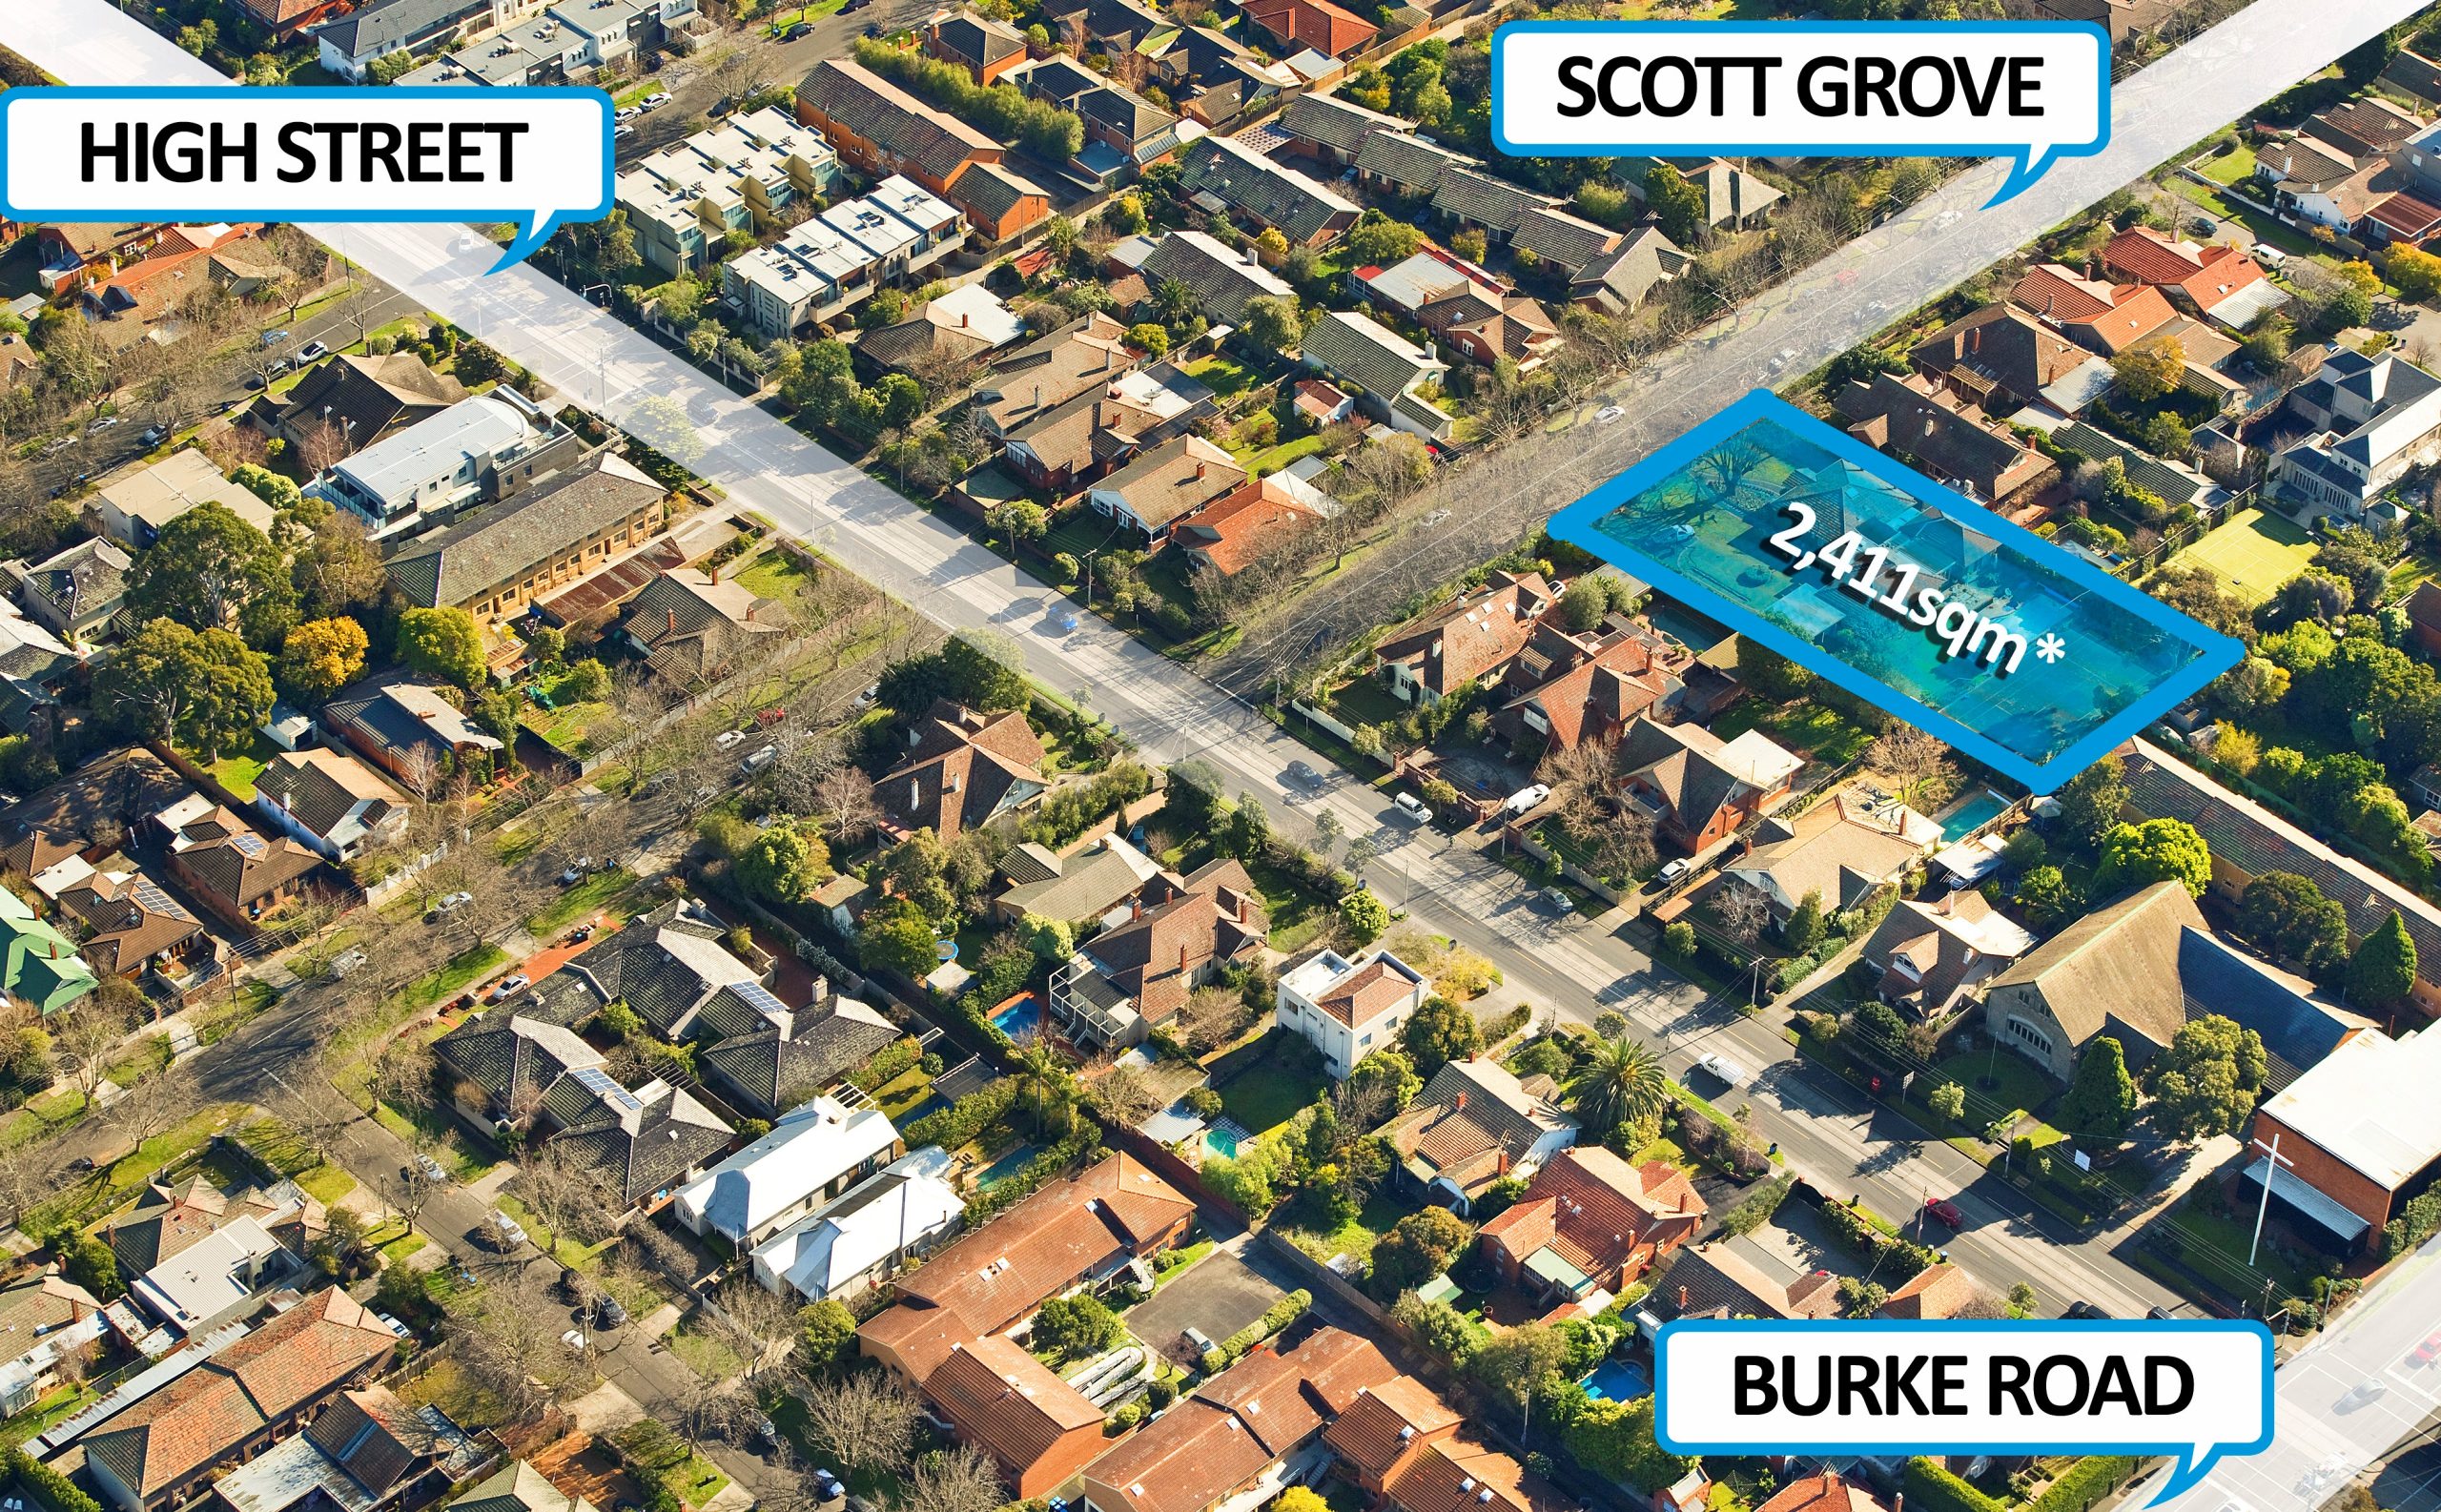 The northernmost tip of Taylors Lakes – a suburb master-planned by Alan Bond – hits the market